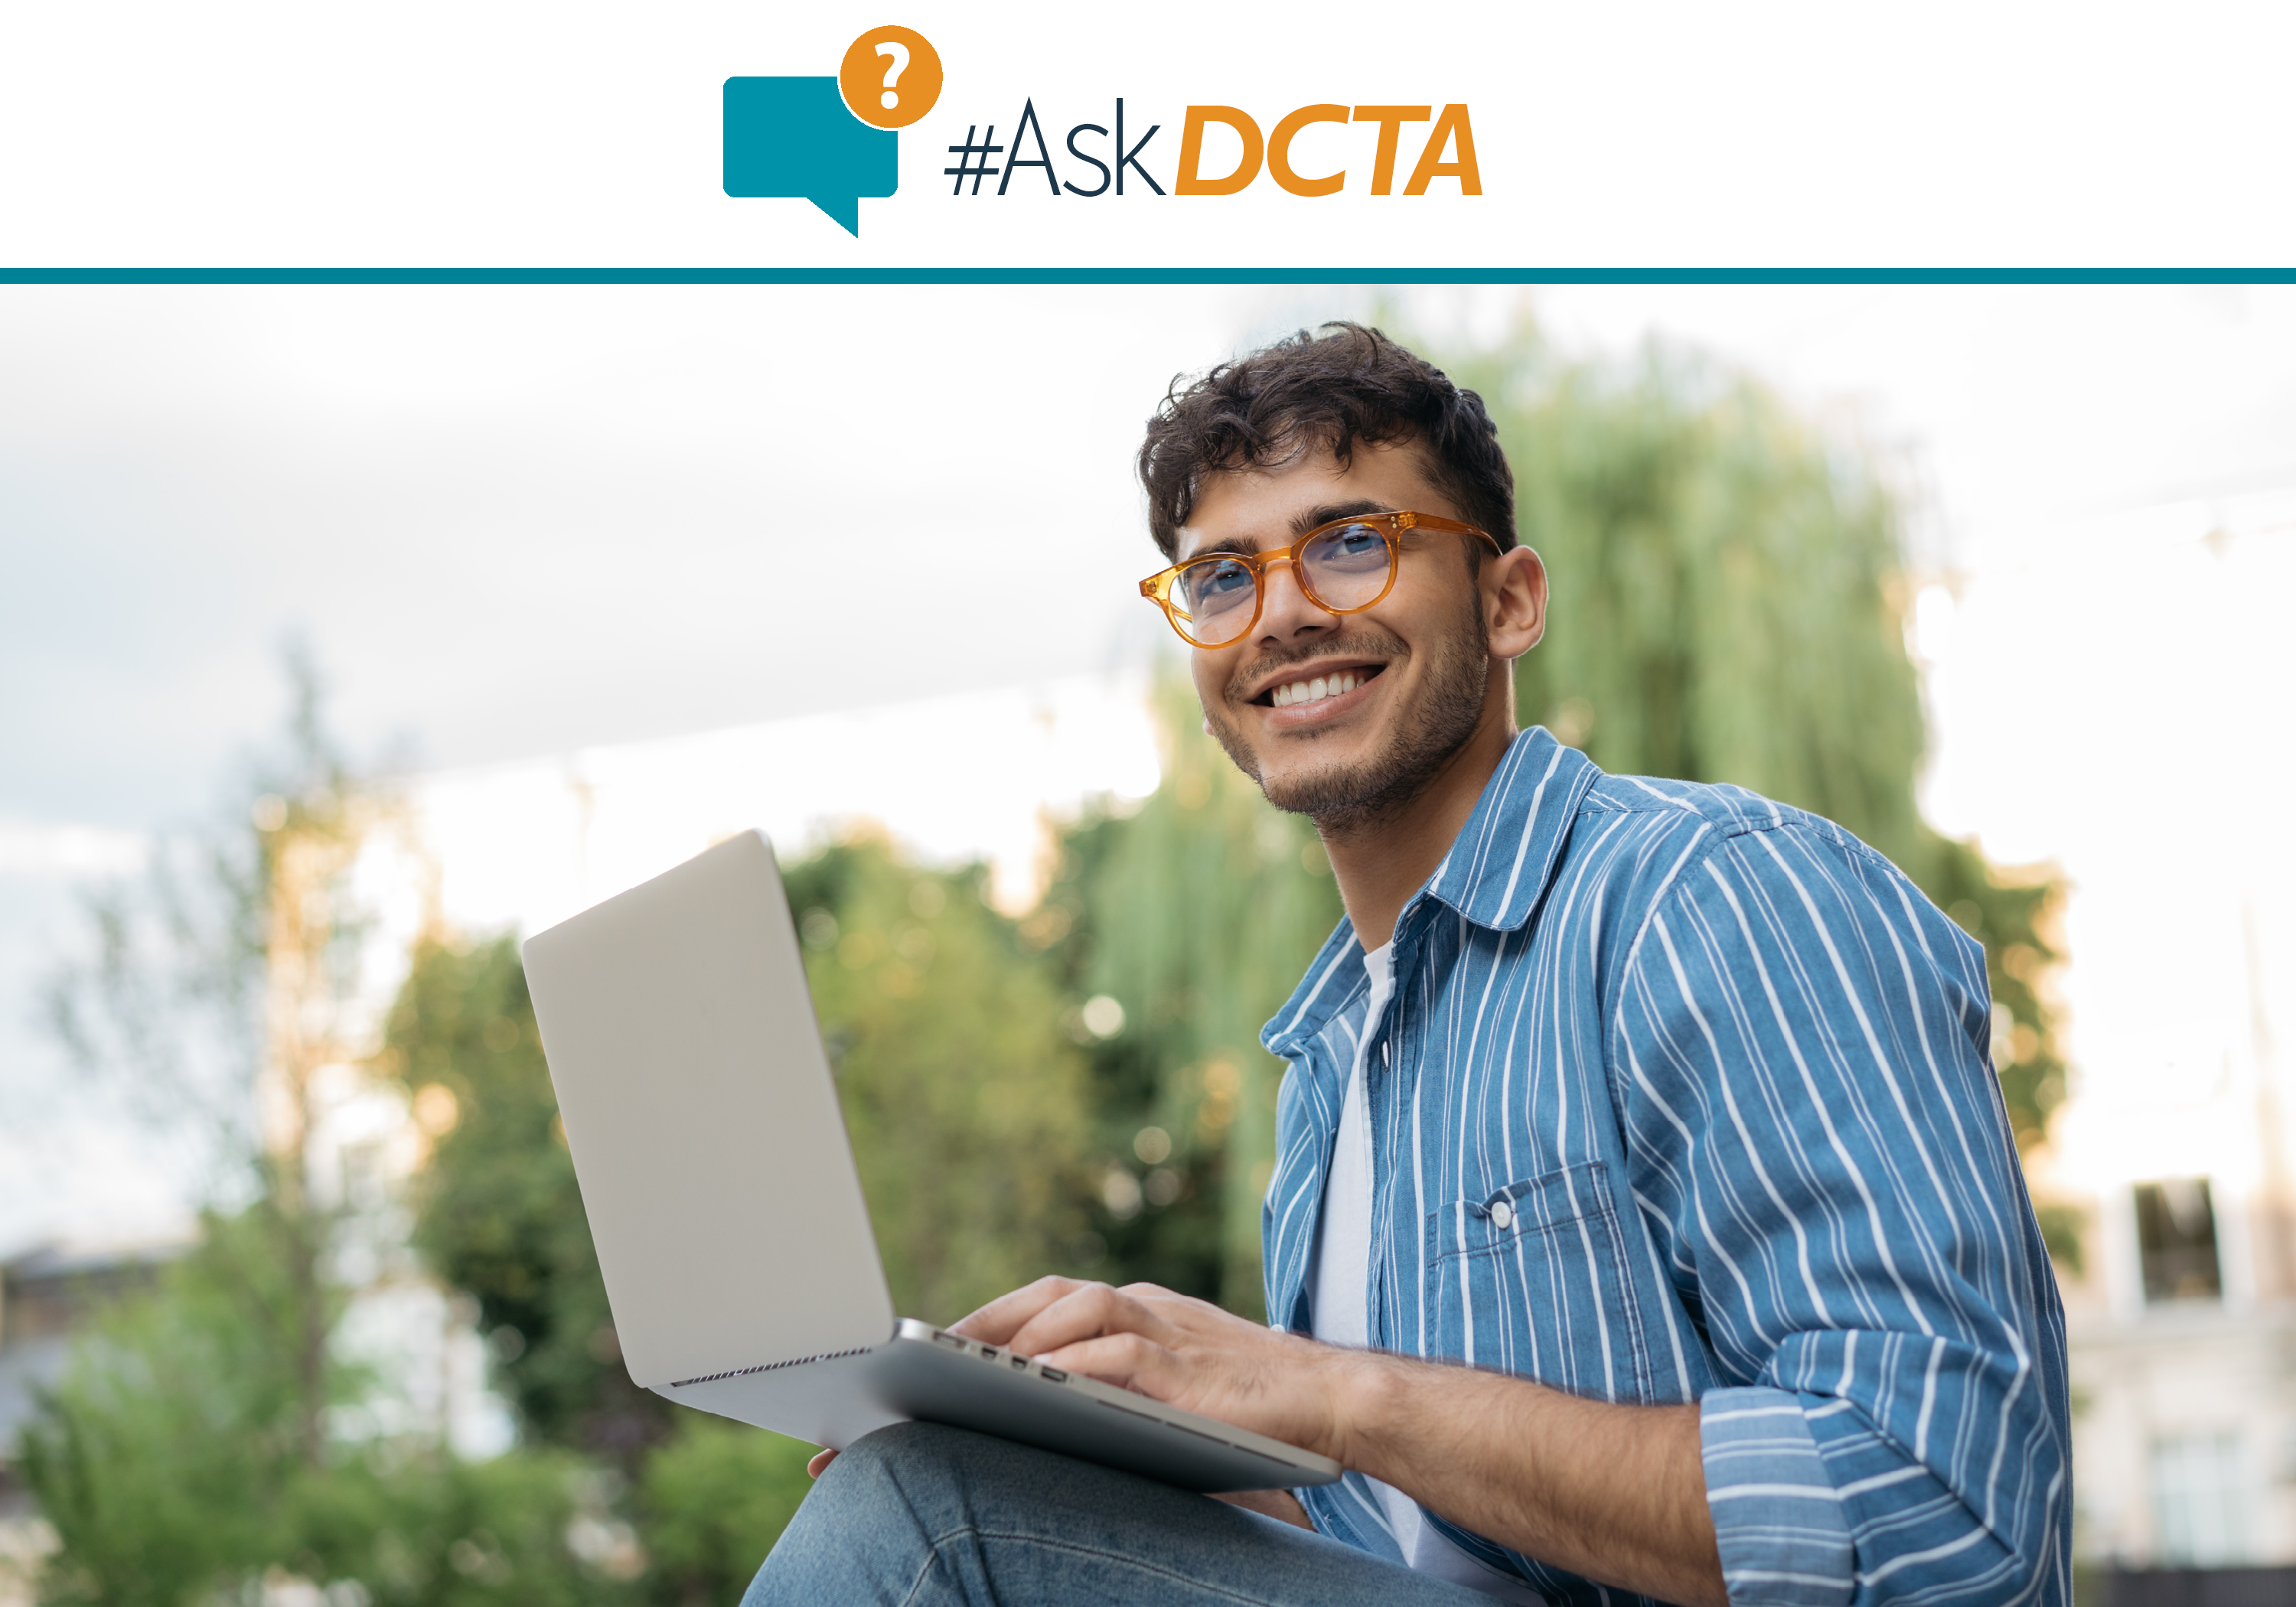 #AskDCTA: Your Biggest Questions About GoZone Service Answered